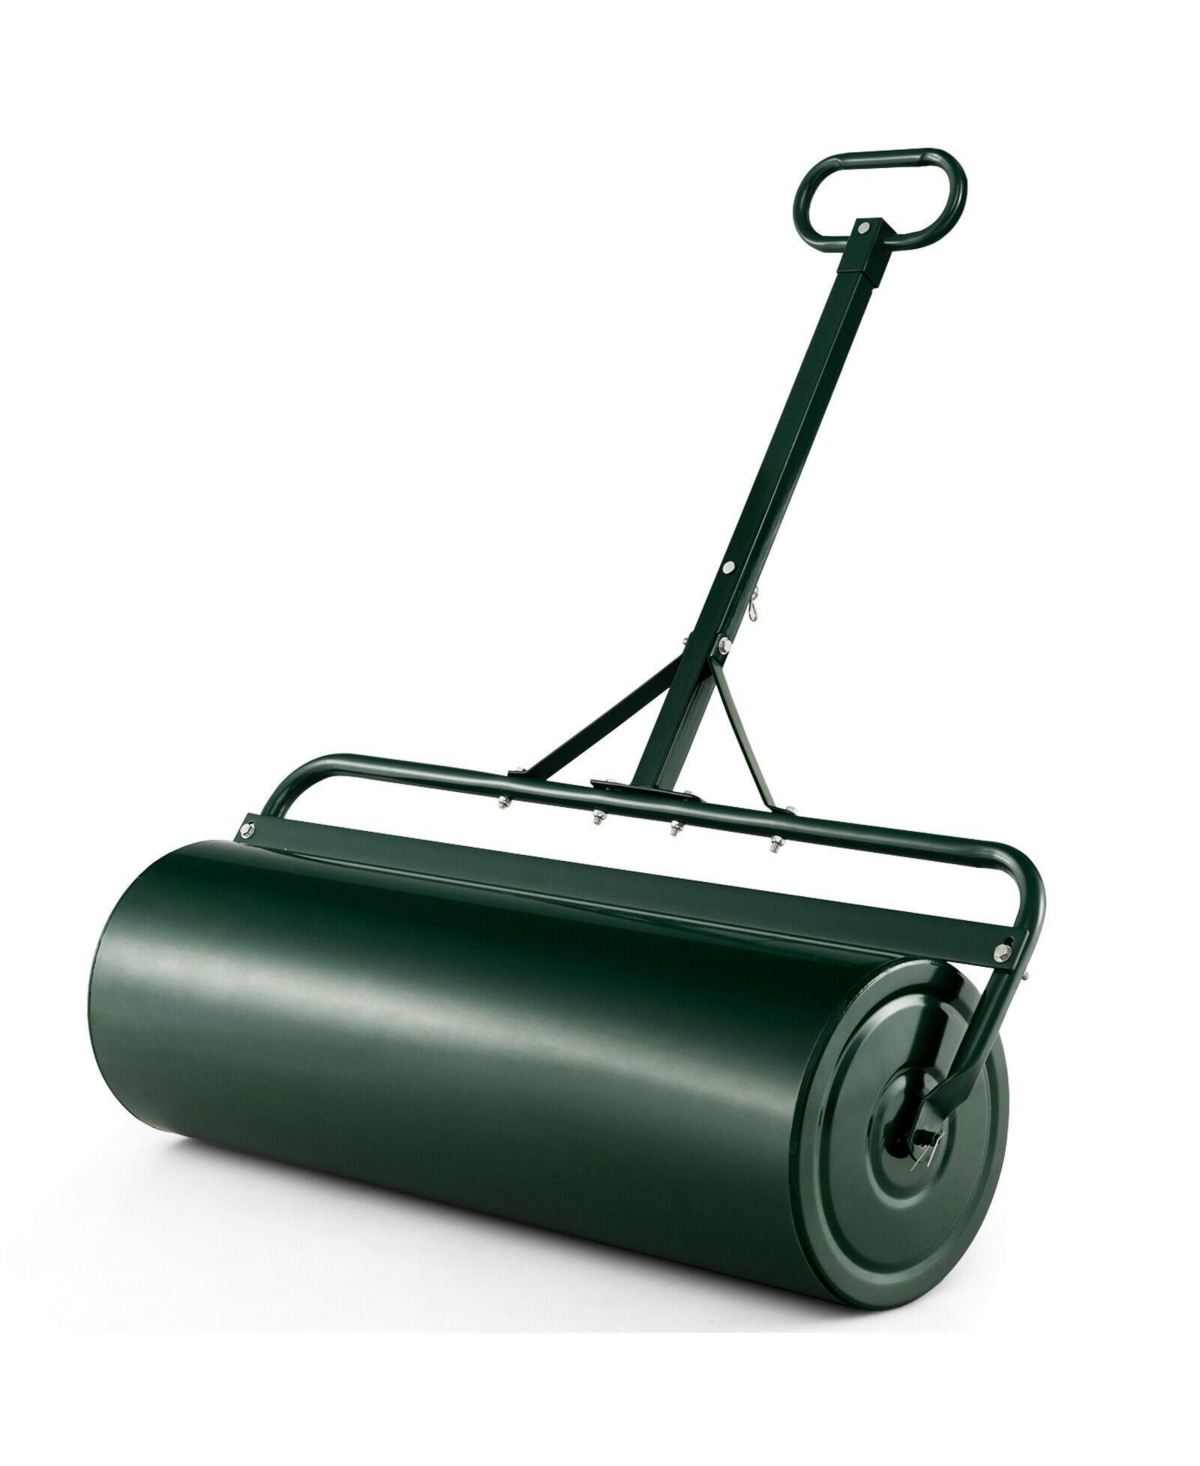 39 Inch Wide Push/Tow Lawn Roller-Green - Green